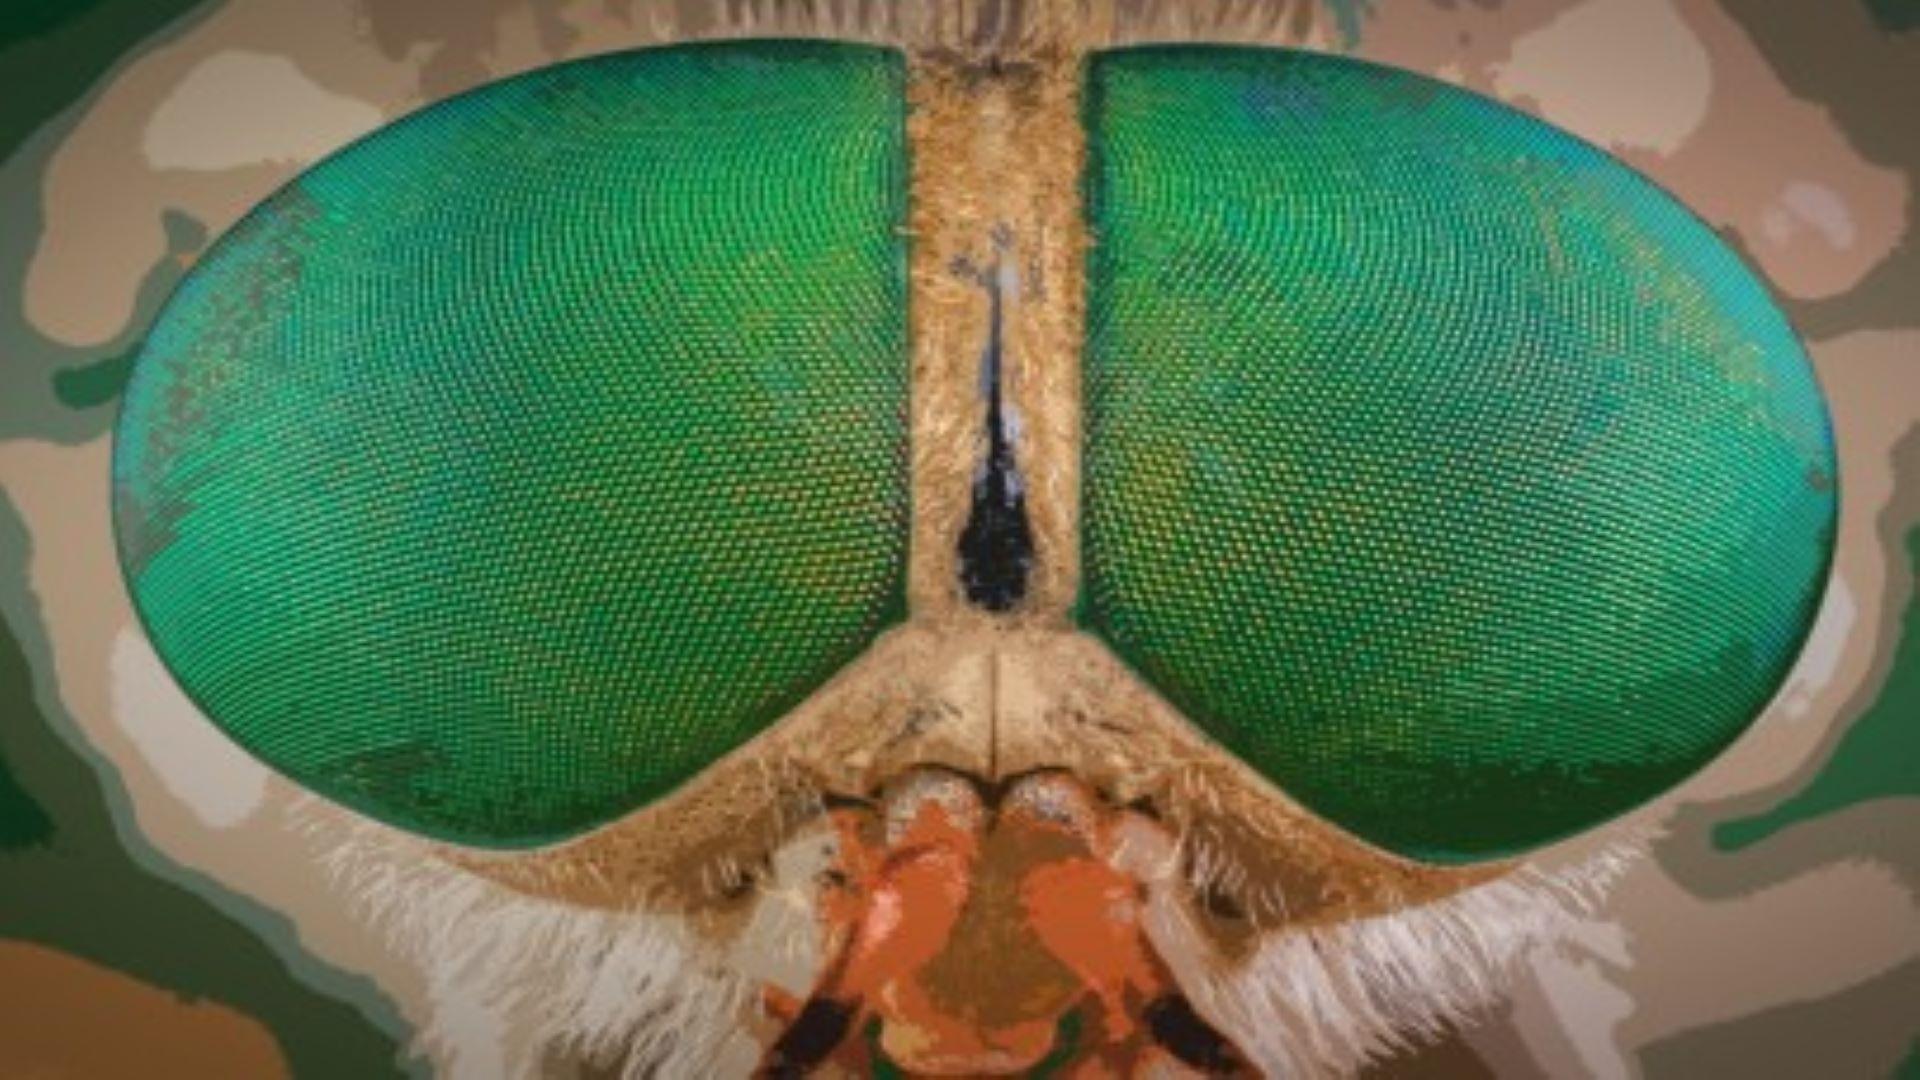 A close up of the eyes of a bug.